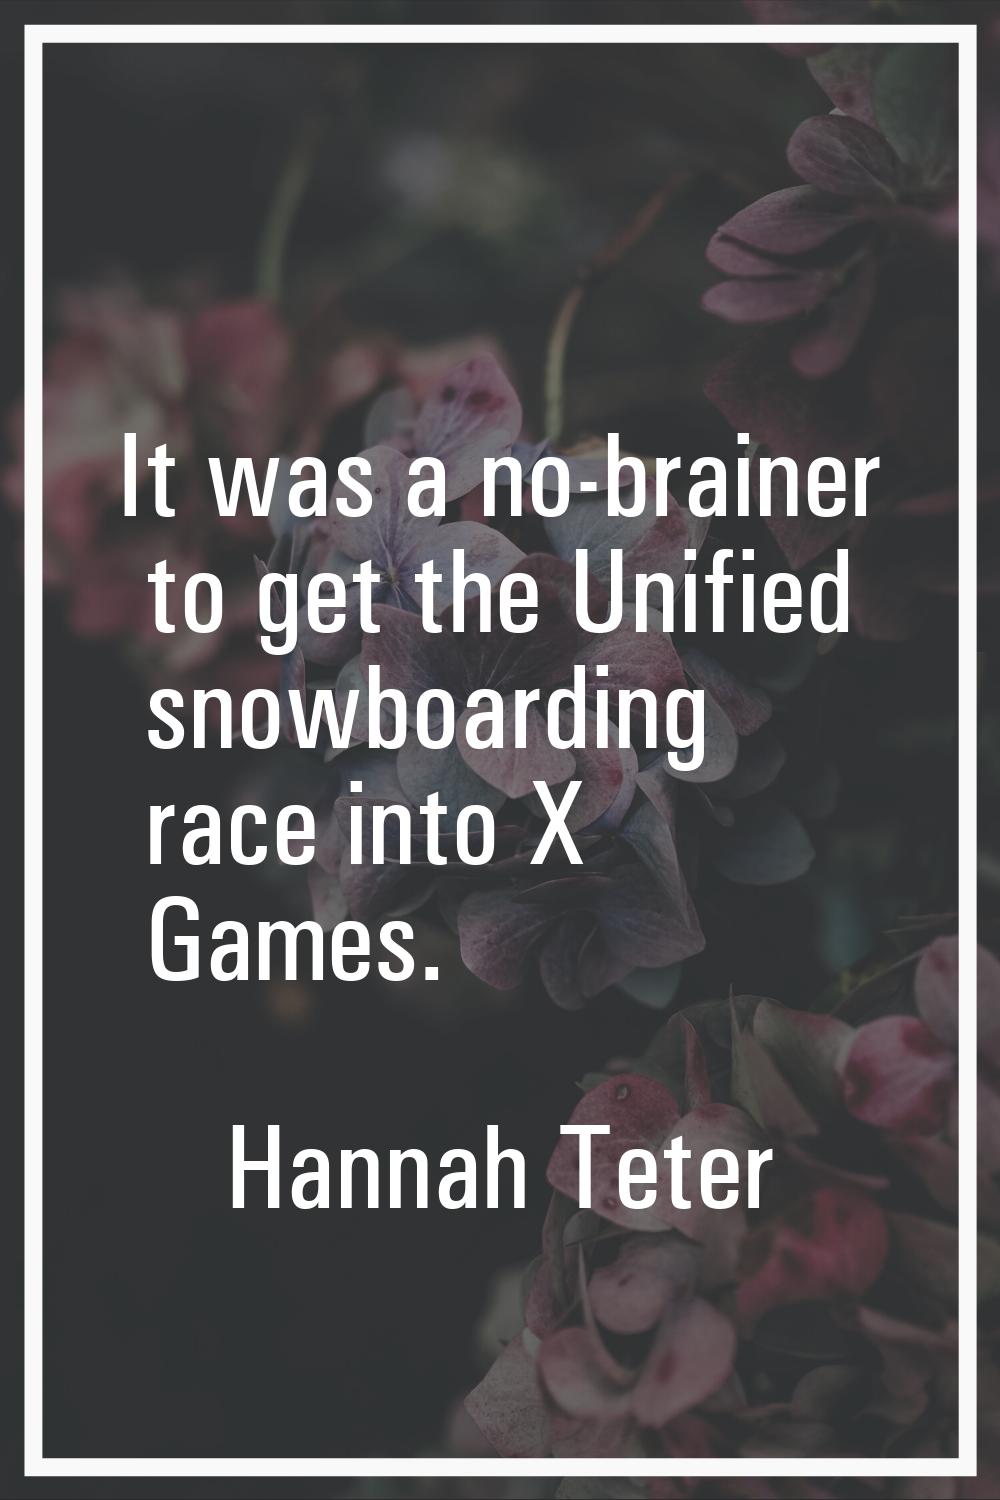 It was a no-brainer to get the Unified snowboarding race into X Games.